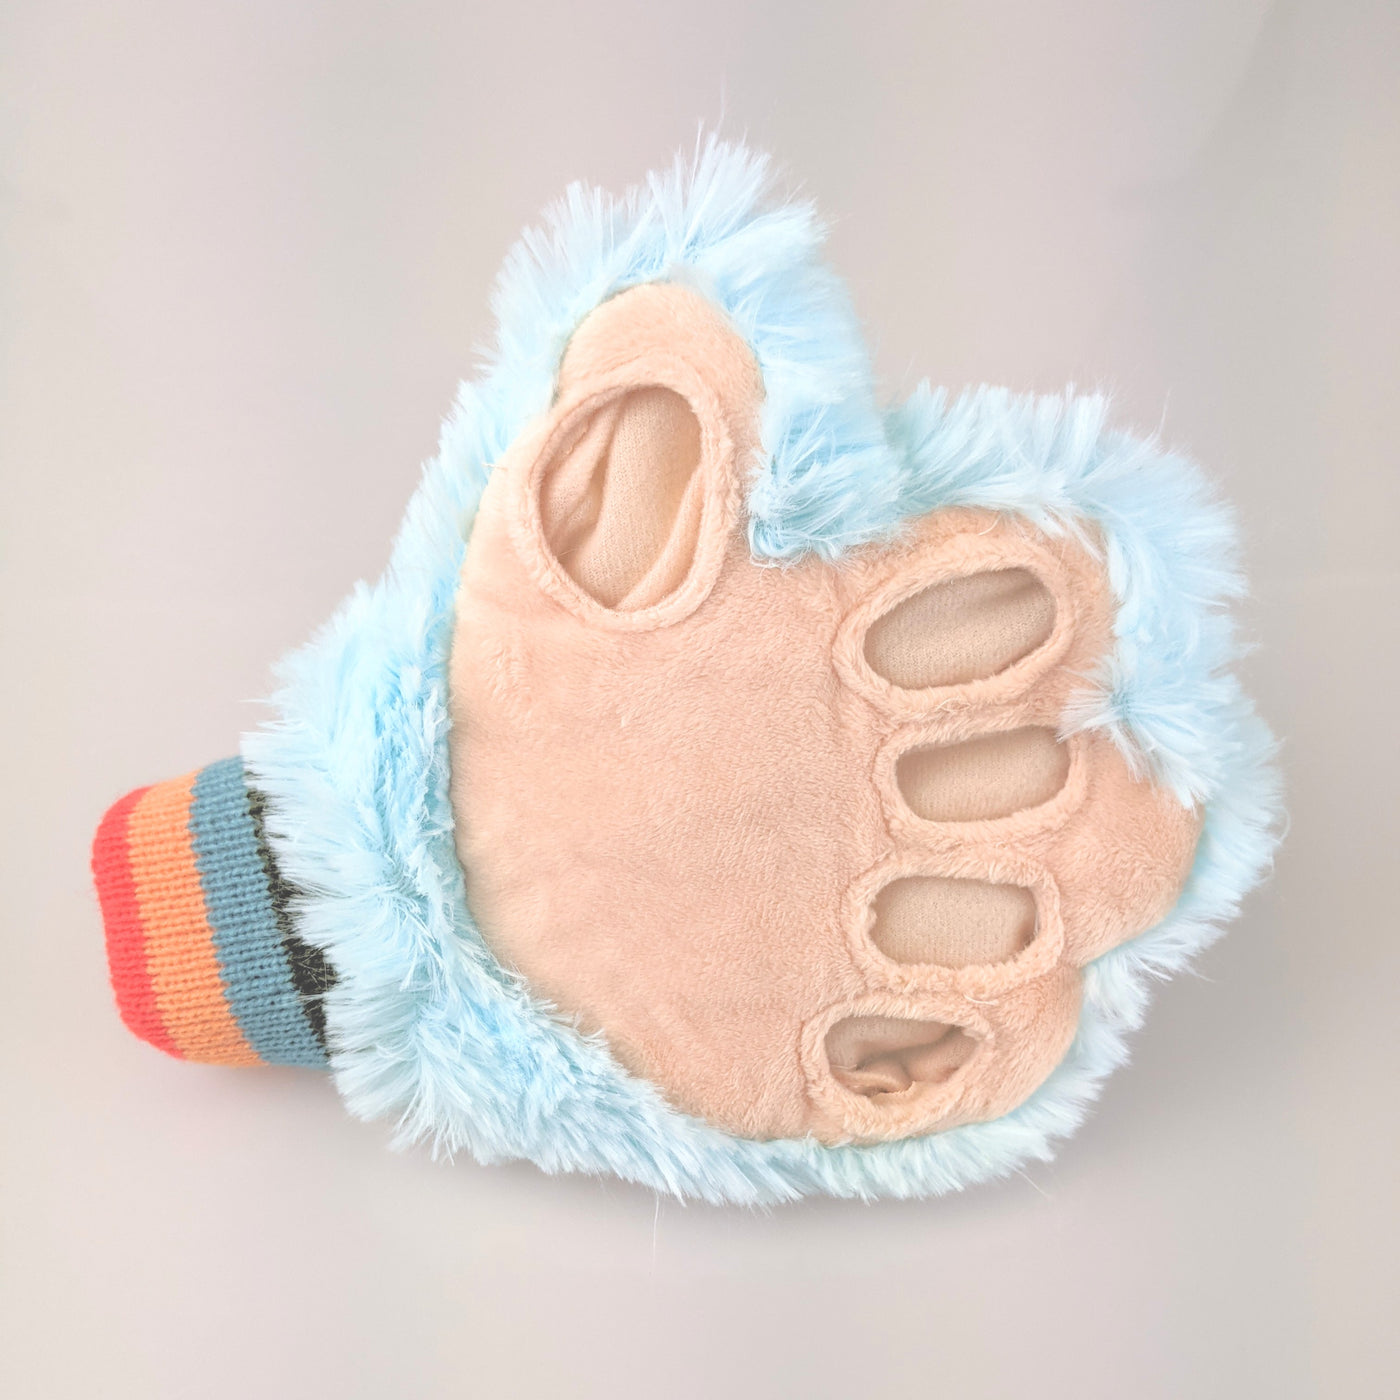 tickle monster glove with blue fluffy outer and holes for fingers.